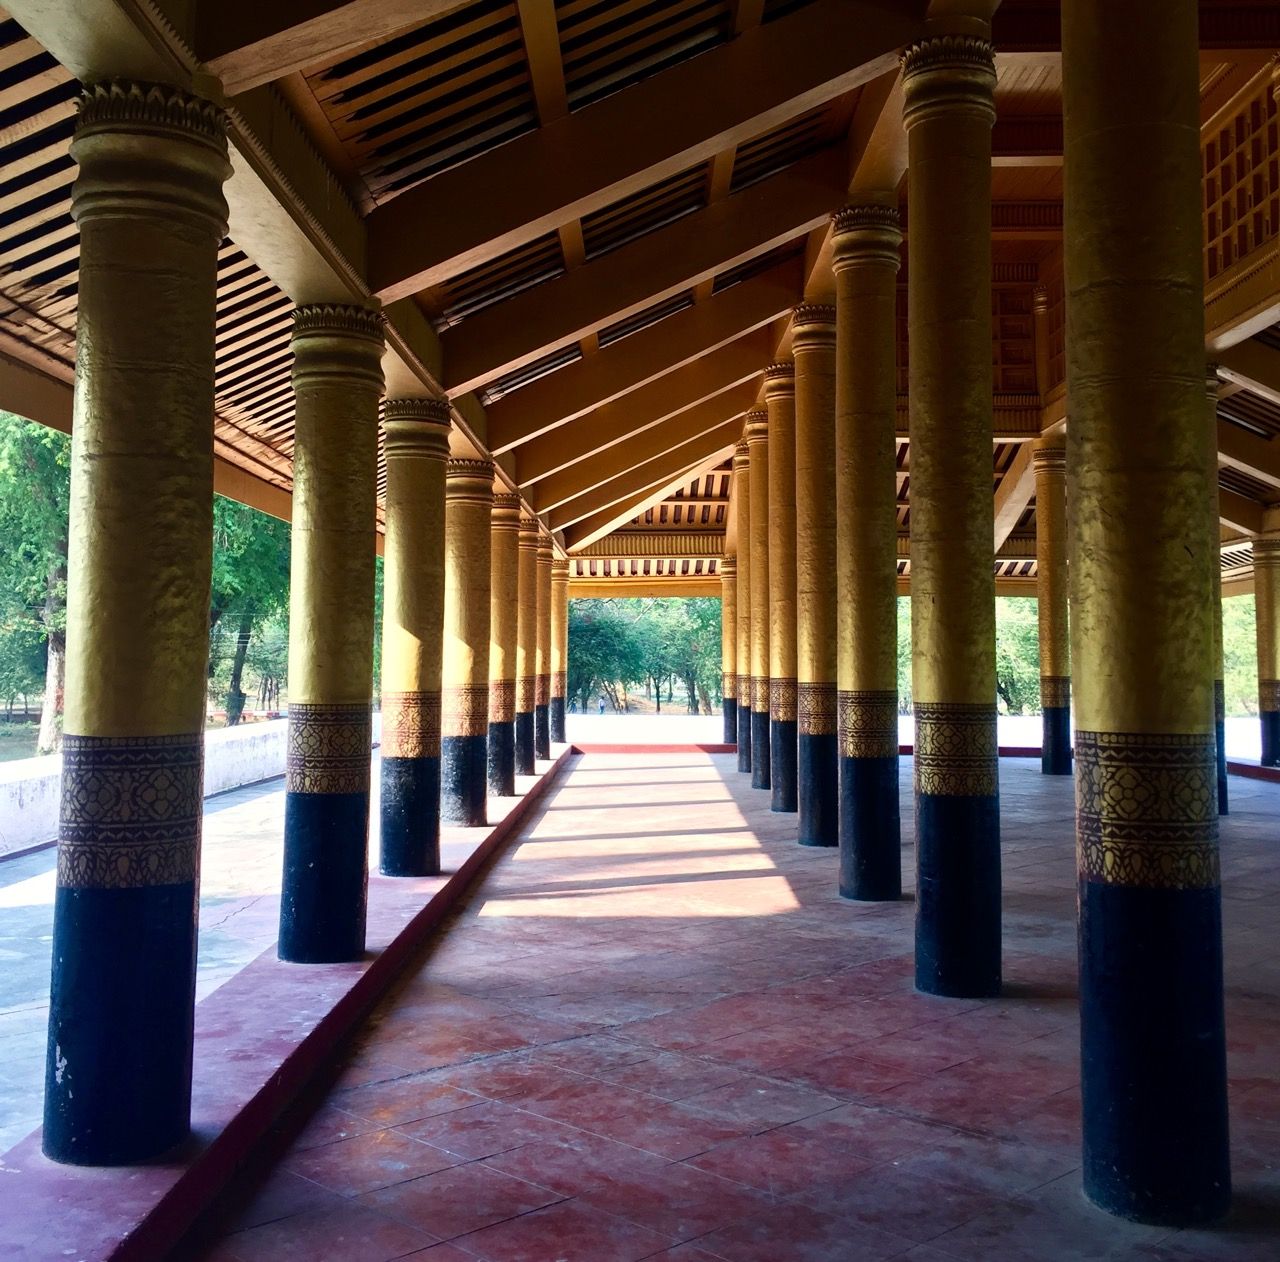 An entryway lined by gold-painted poles.